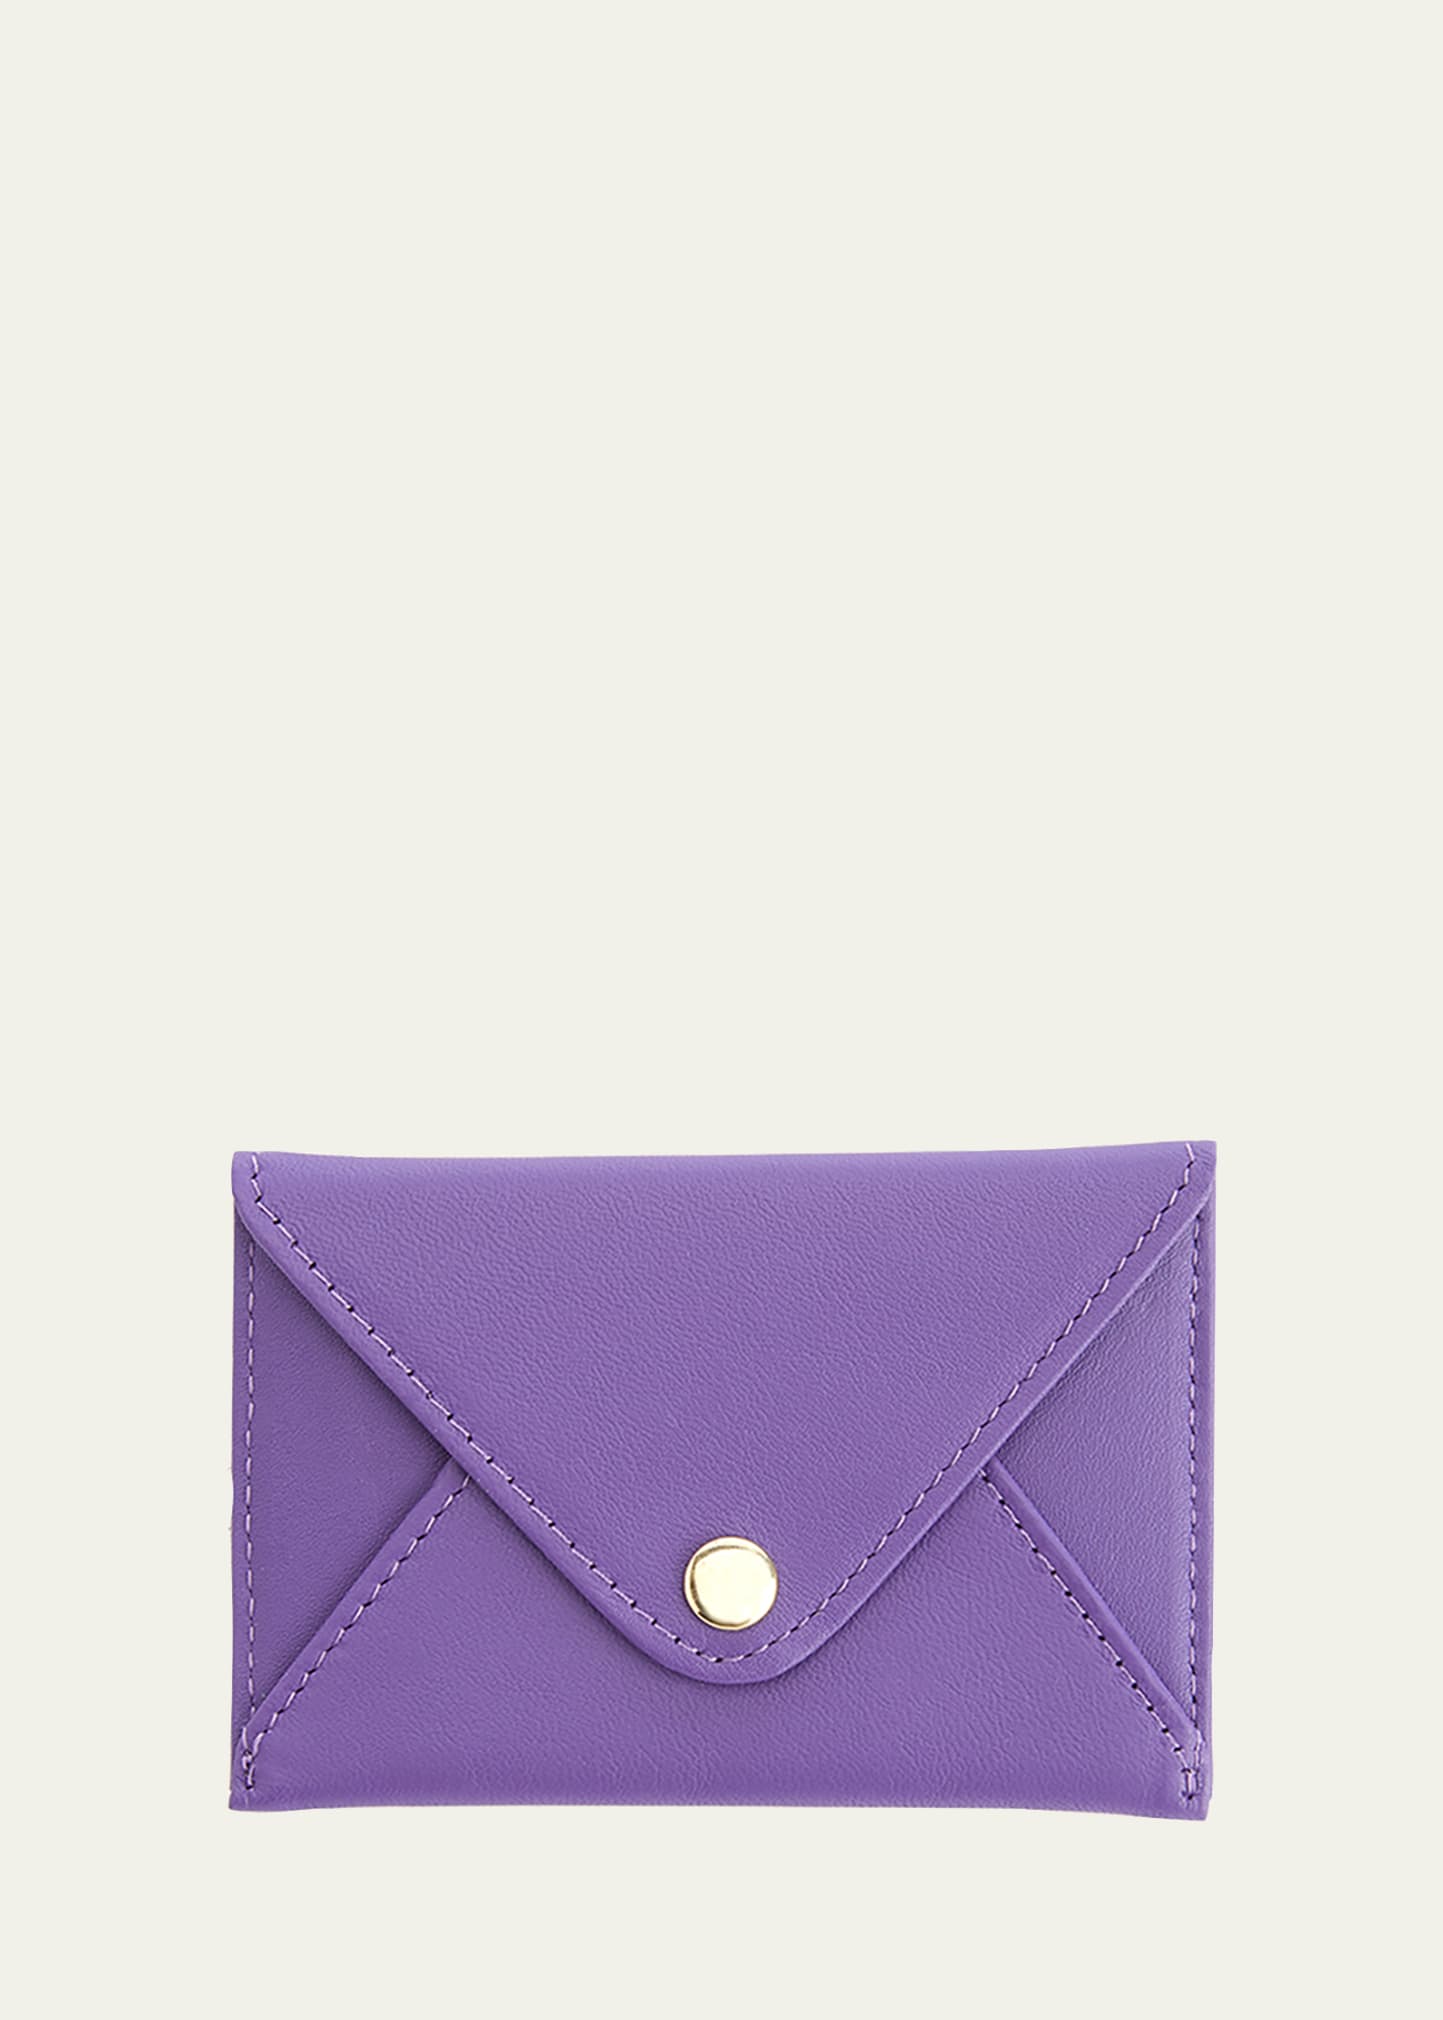 Royce New York Leather Envelope Style Business Card Holder In Purple